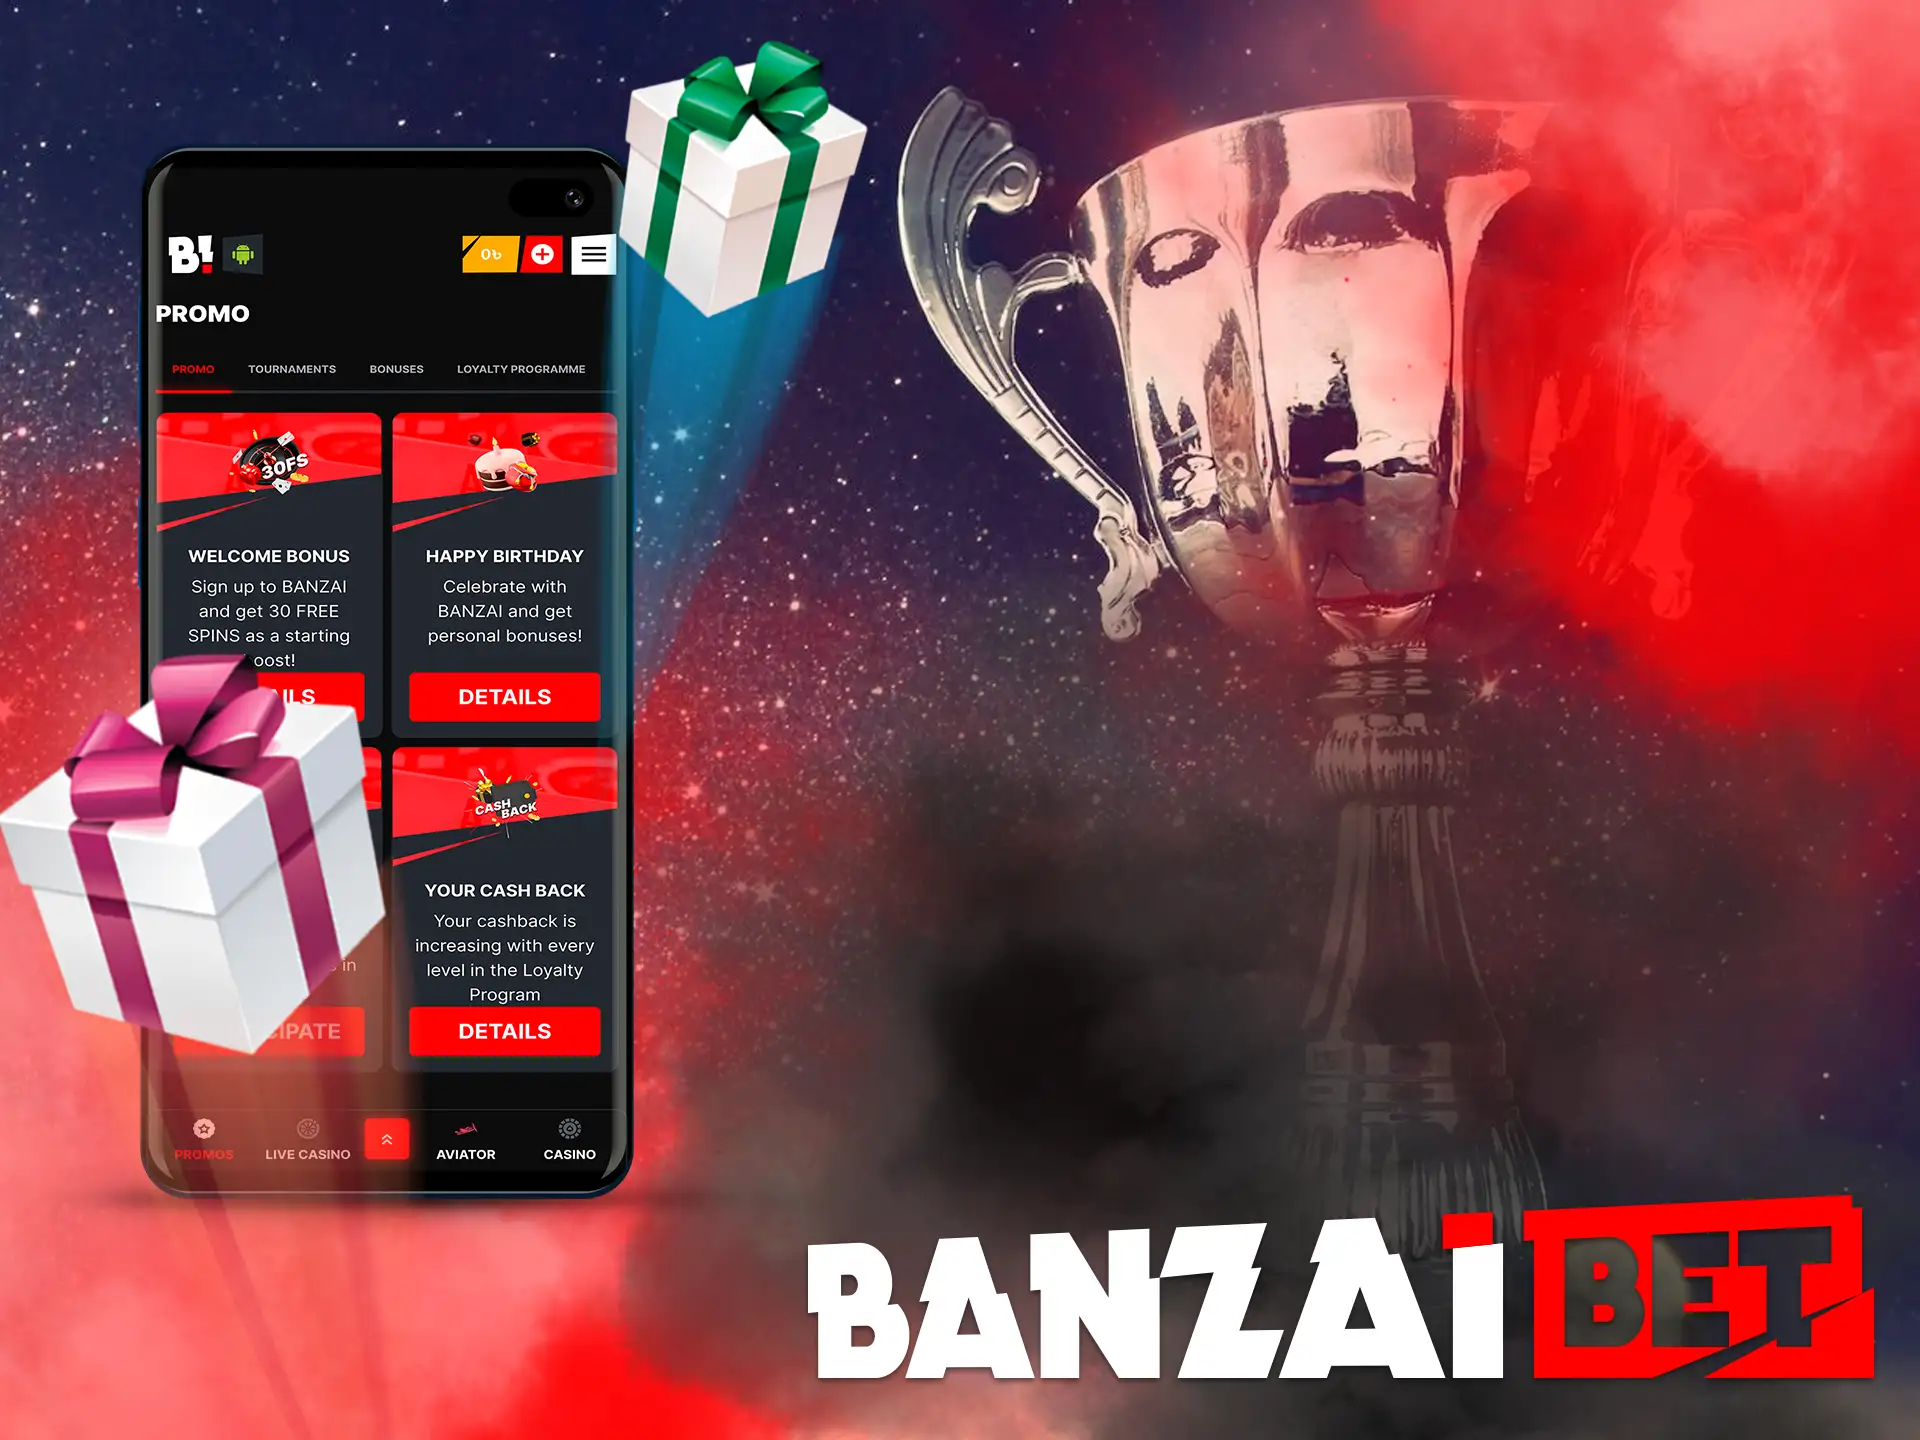 Receive special offers from Banzai App which will give you a new and pleasant interaction experience.